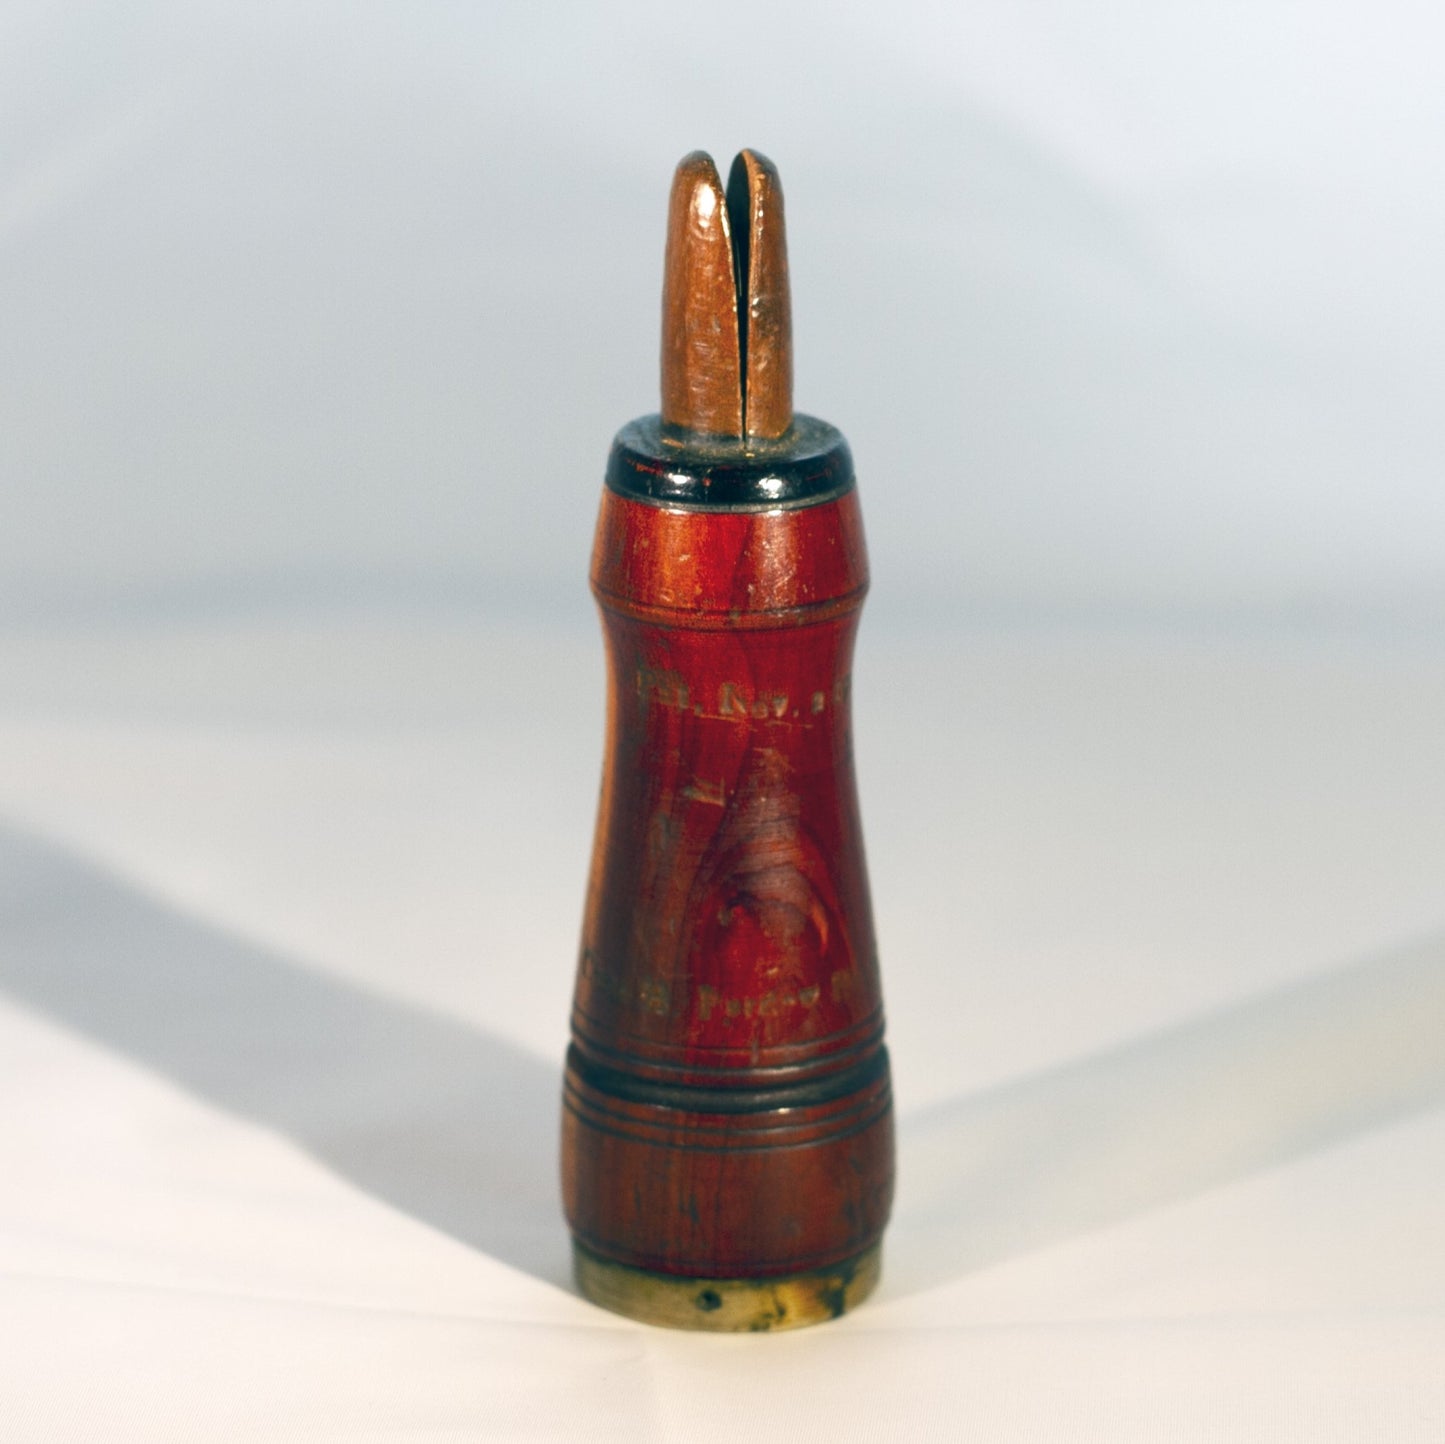 CHARLES H. PERDEW 5” WOOD CROW CALL Patent Date 1909